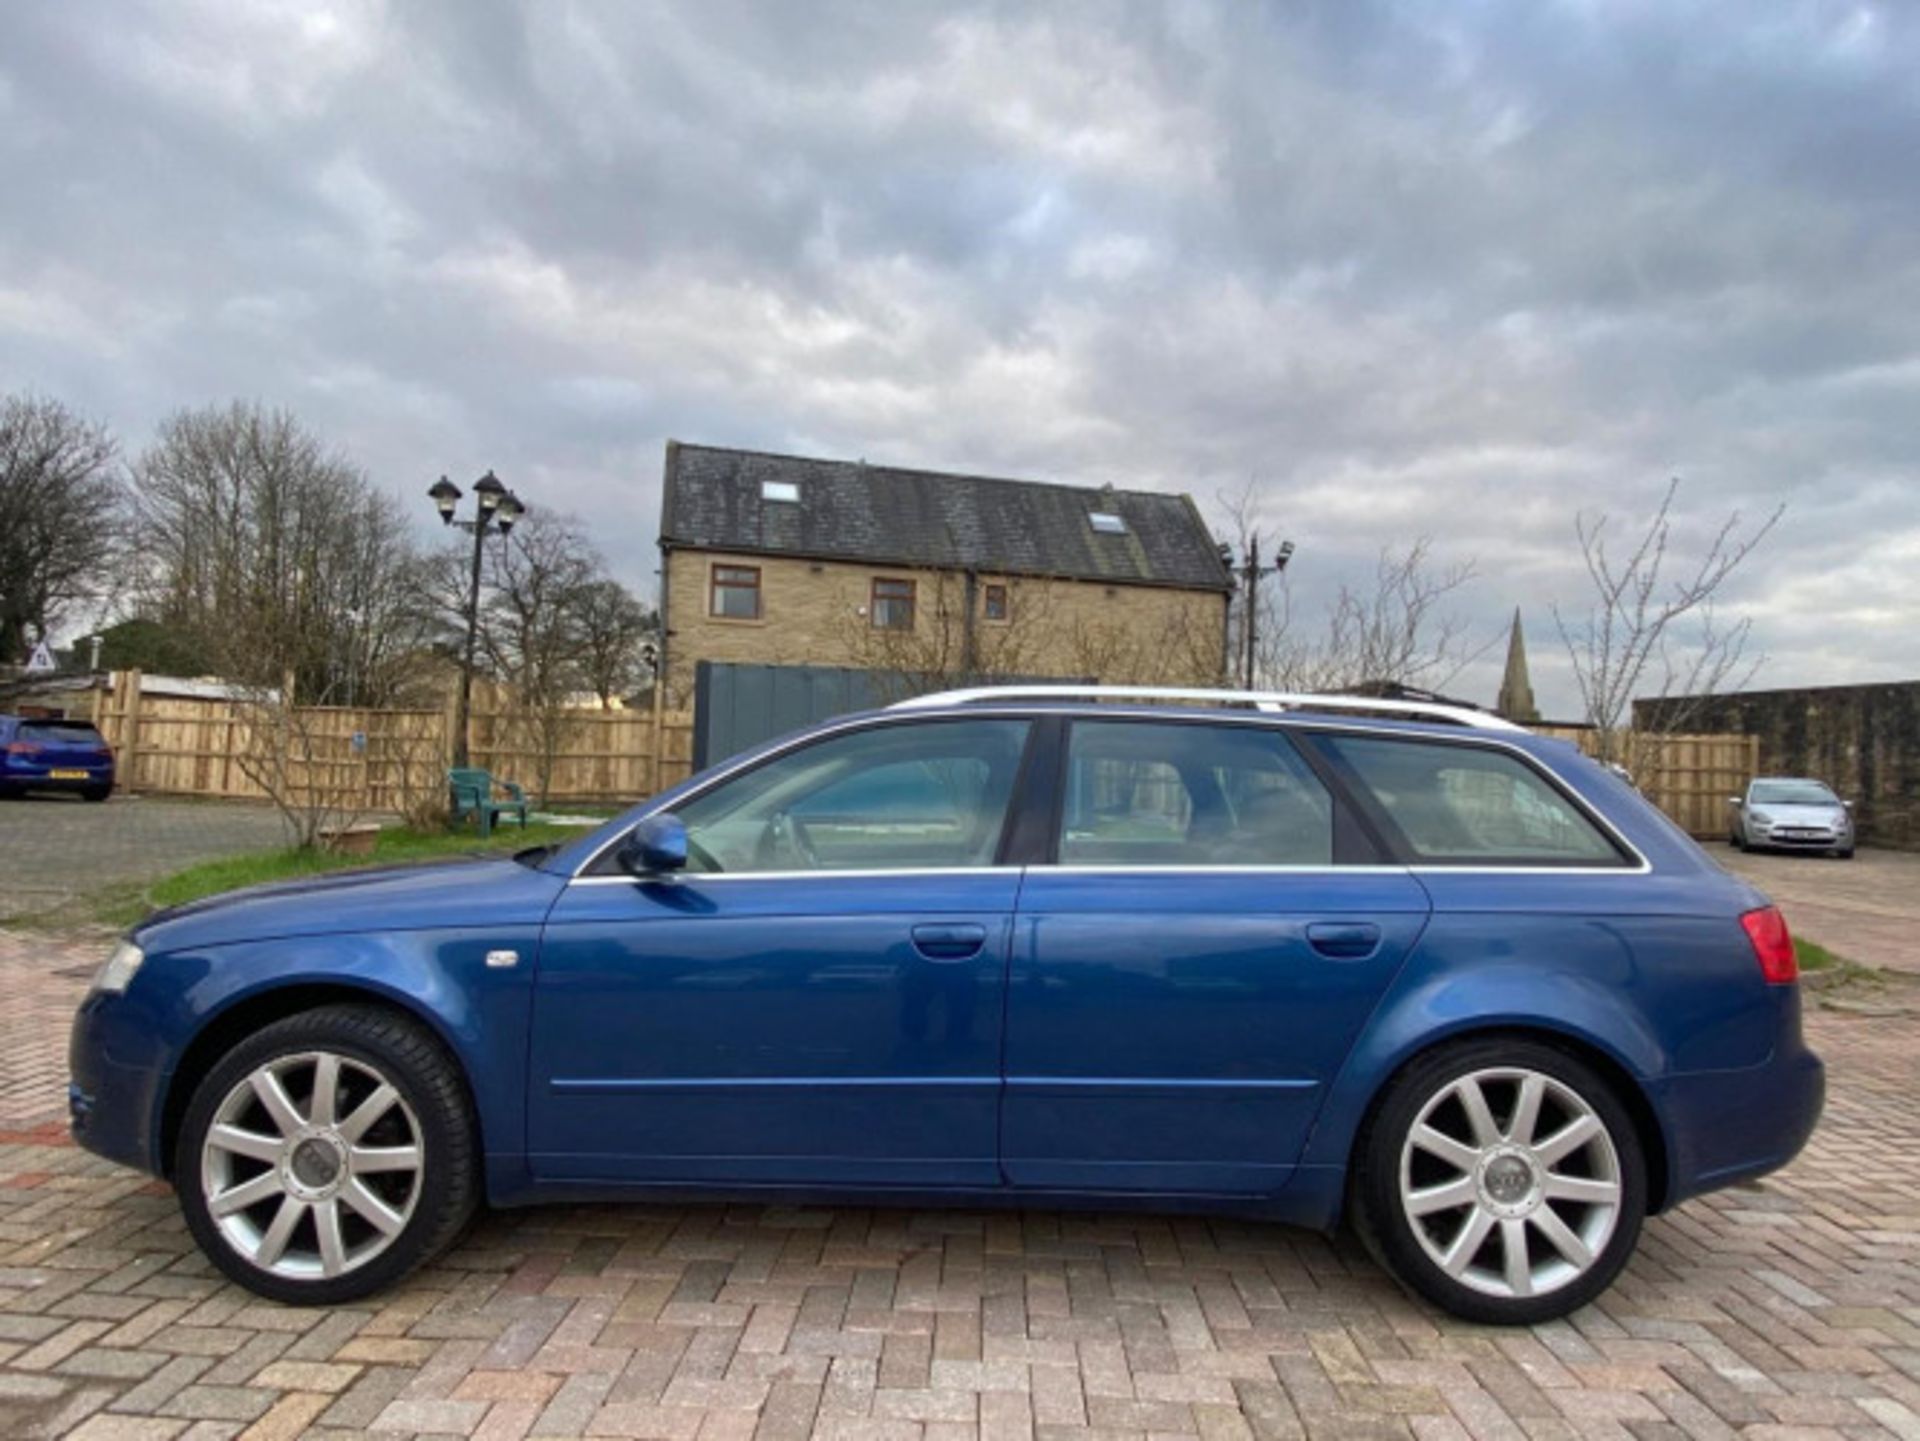 AUDI A4 AVANT 1.9 TDI SE 5DR ESTATE - RARE AND RELIABLE LUXURY WAGON >>--NO VAT ON HAMMER--<< - Image 87 of 97